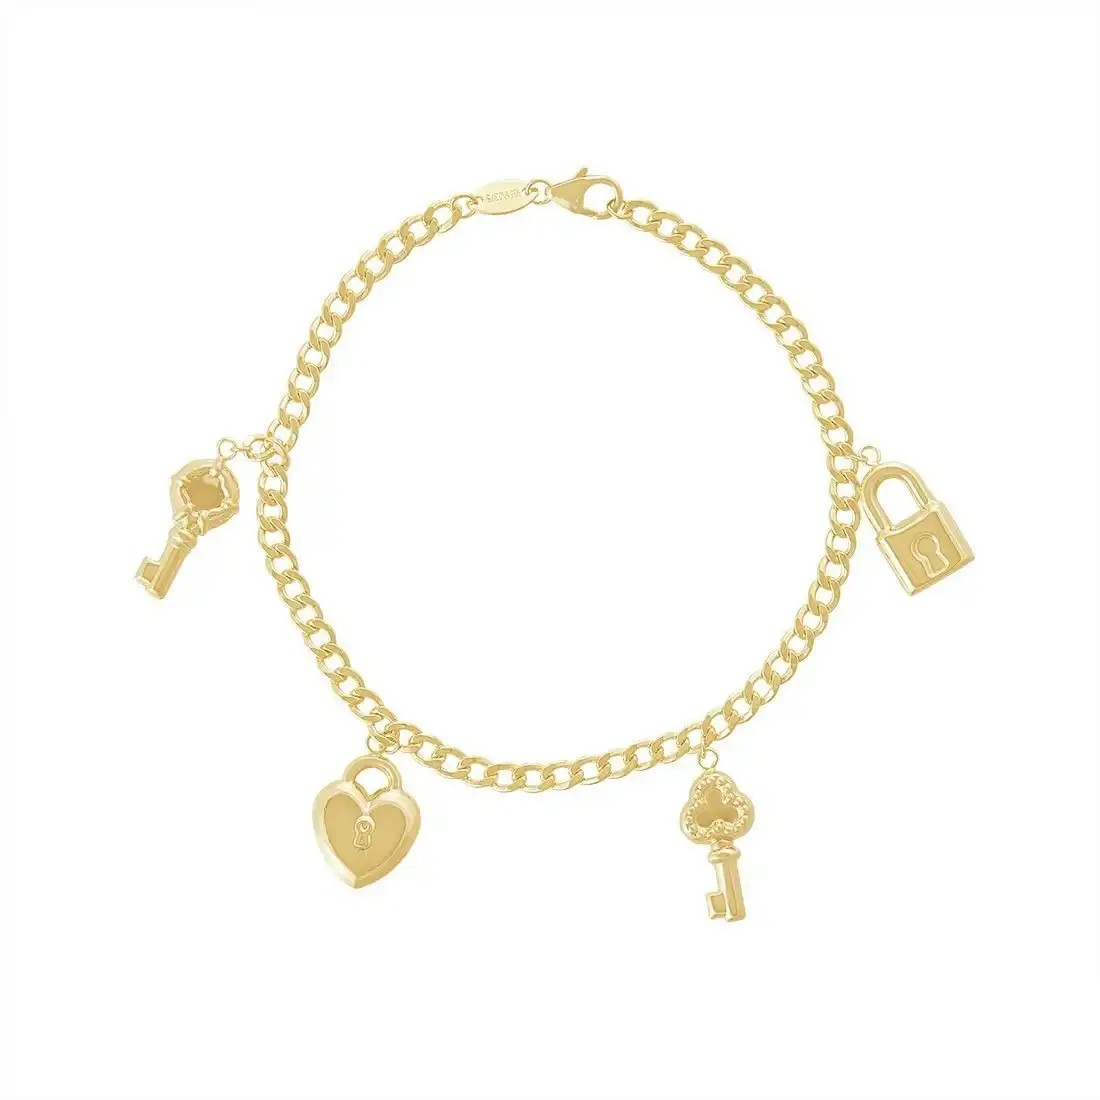 9ct Yellow Gold Silver Infused Lock and Key Charm Bracelet